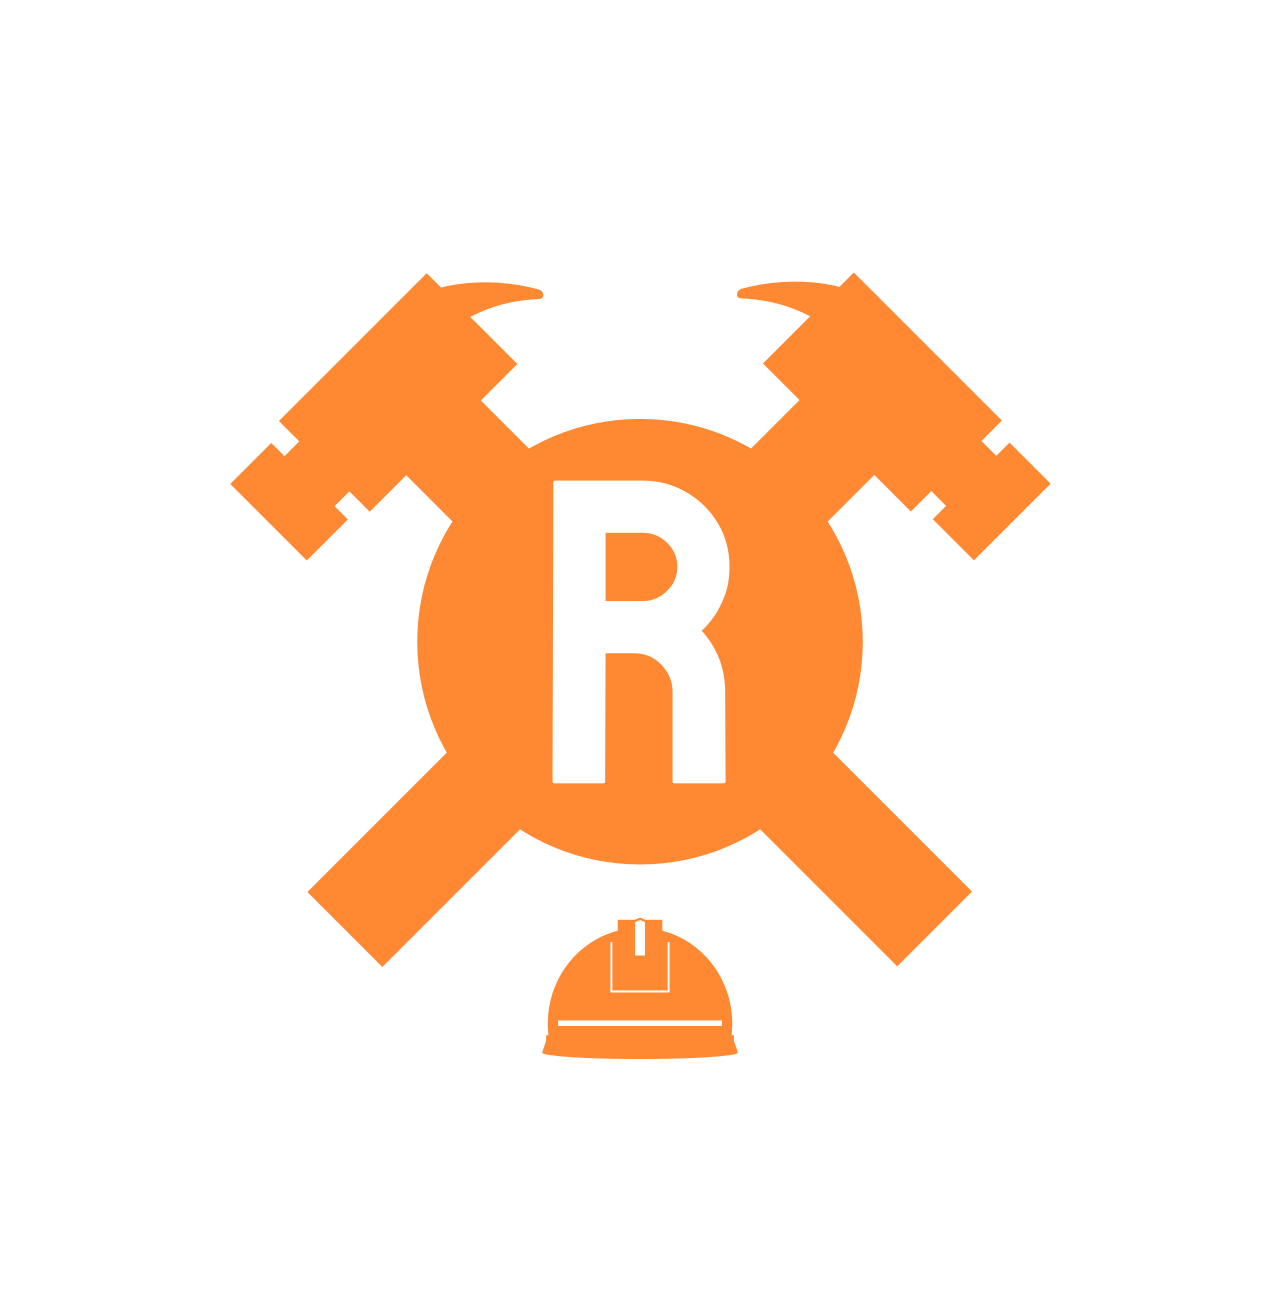 Roth Brothers Construction's web page